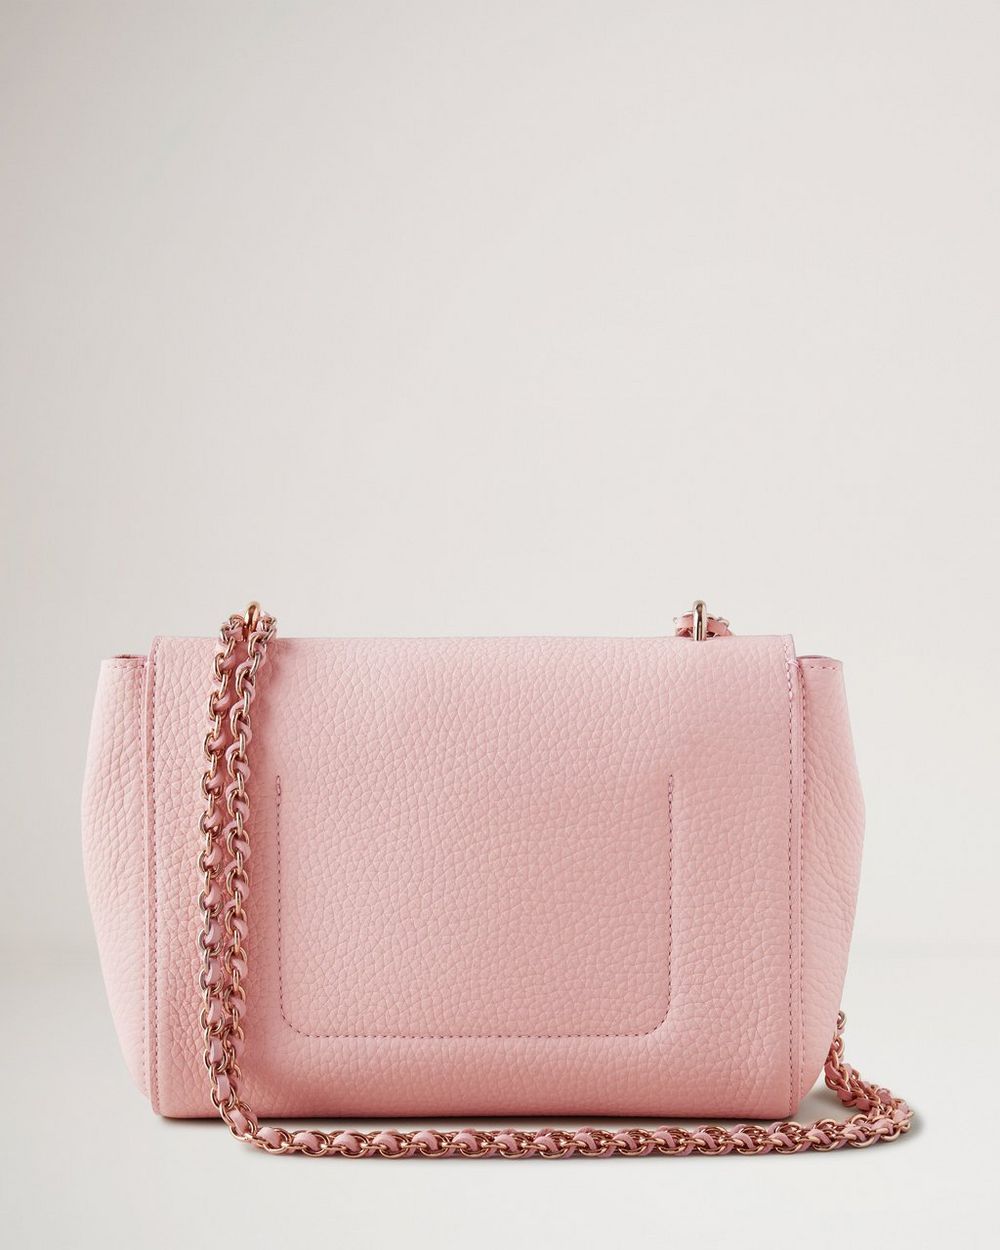 Mulberry Bayswater Foldover Top Small Crossbody Bag in Pink